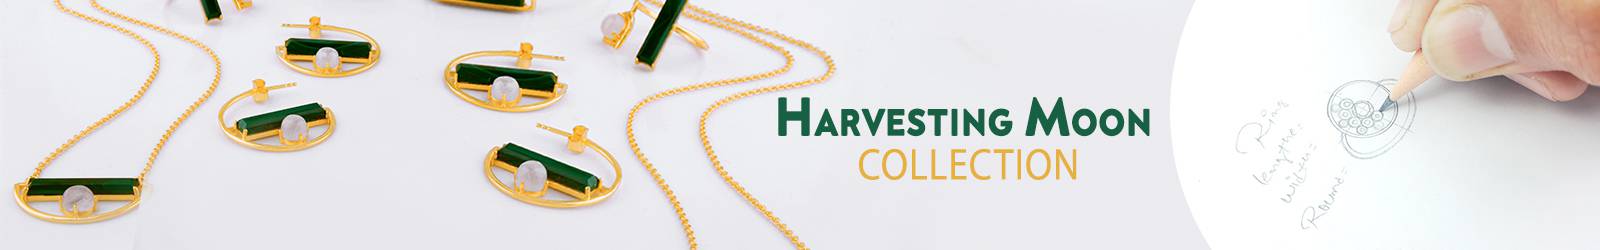 Online Wholesale Harvesting Moon Jewelry Collection